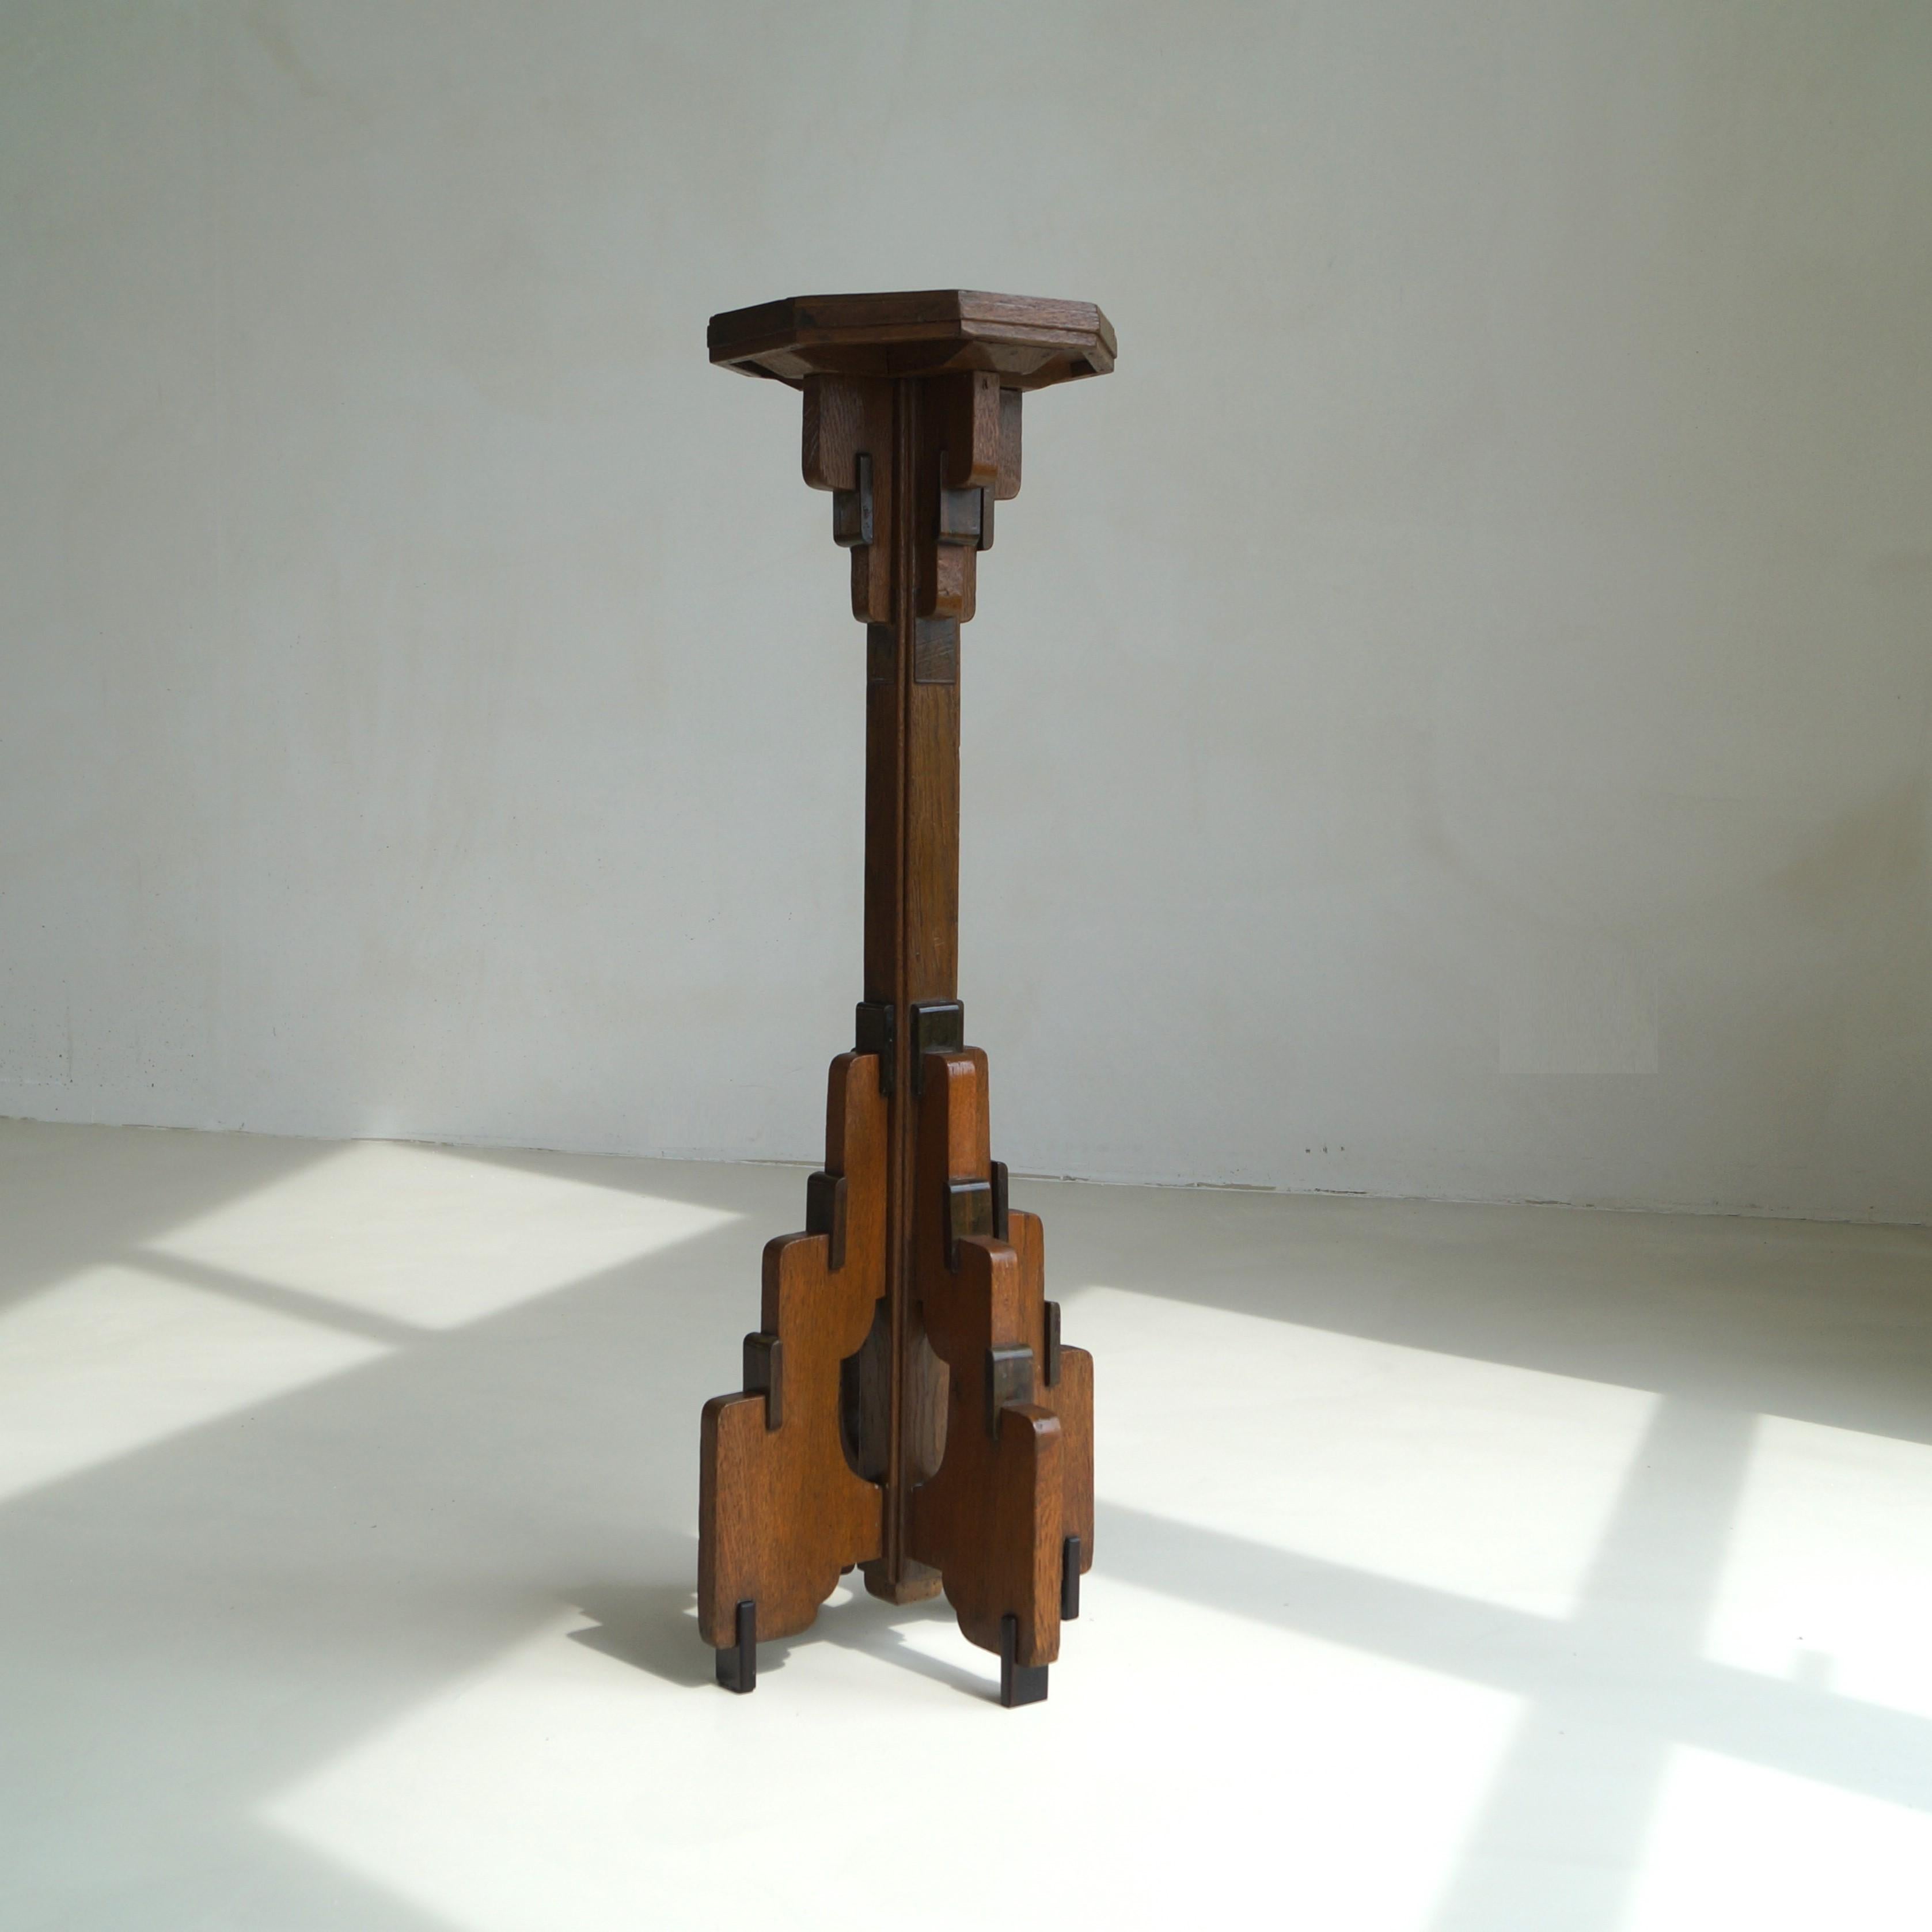 Dutch Haagse School 1920s plinth, pedestal or candle stand attributed to designer P.E.L. Izeren for ''De Genneper Molen''. 
This piece was most probably designed as an altar candle holder for a church. A rare modernist design, futurist even.
The